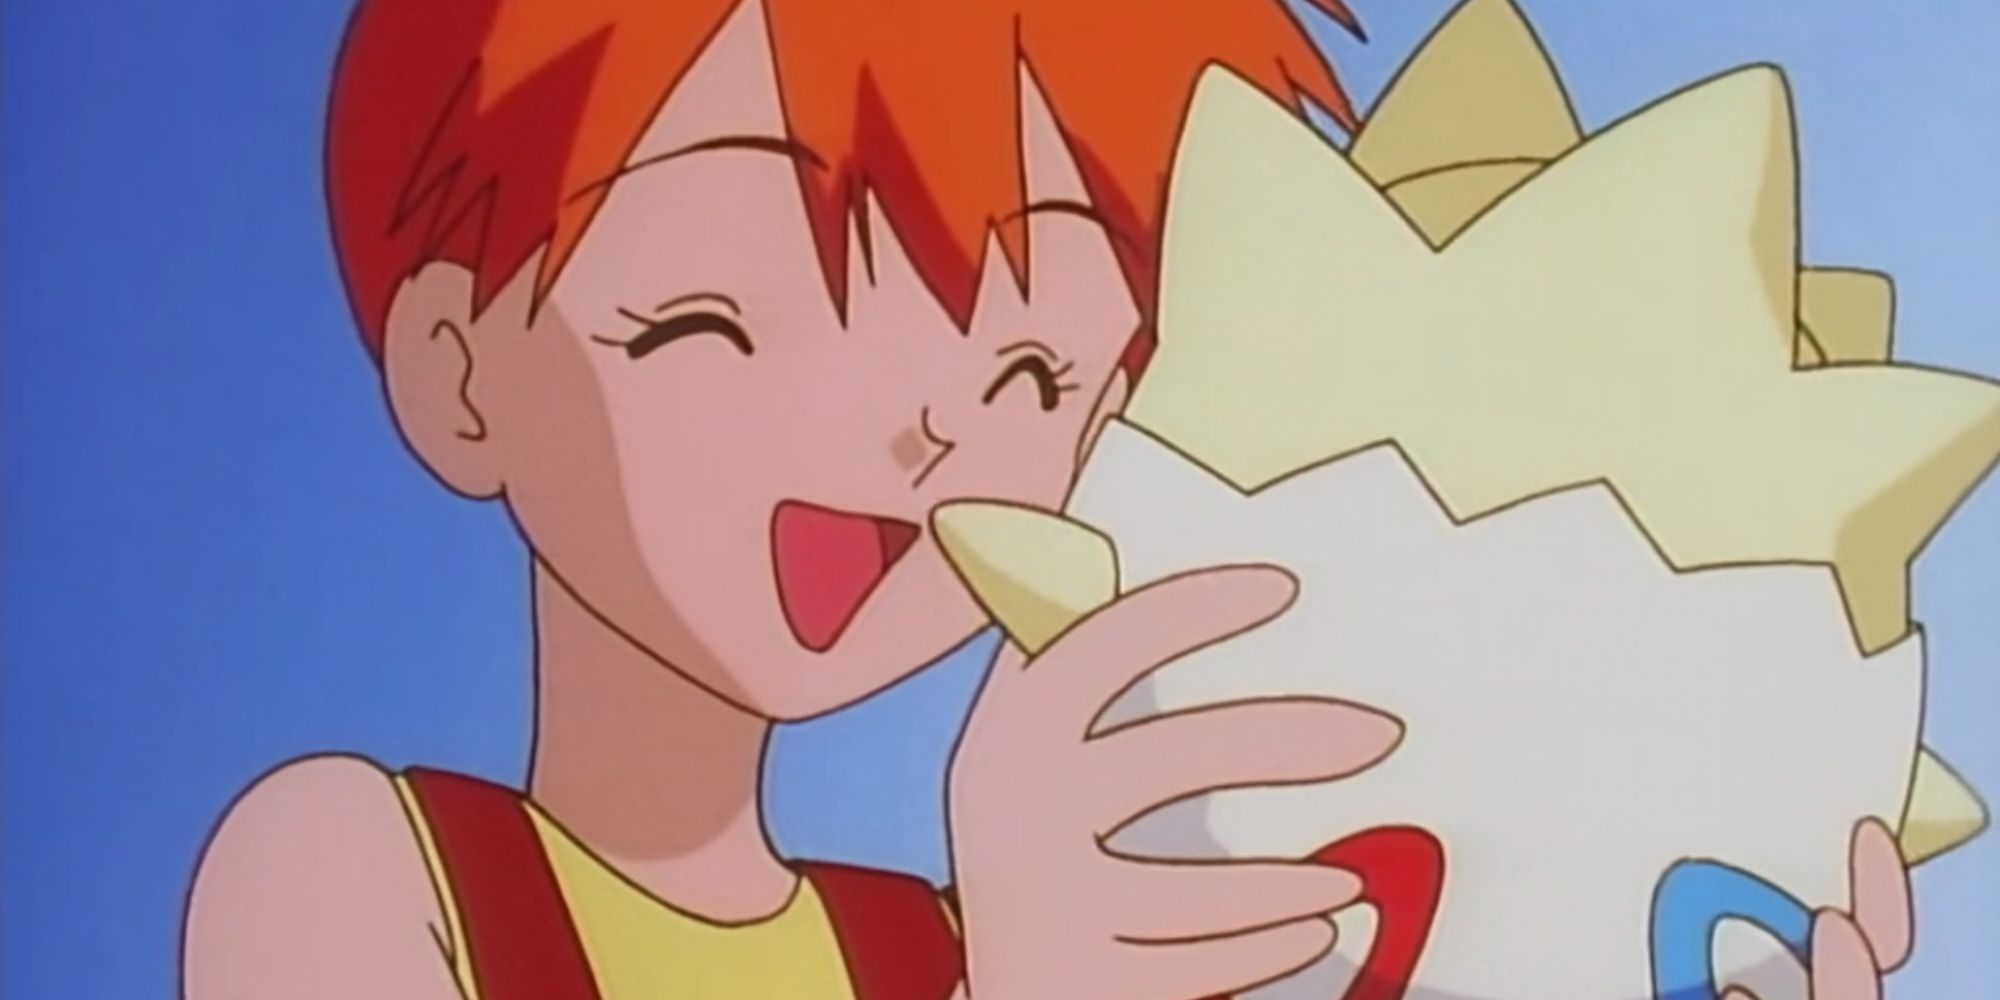 Misty holds Togepi in front of a blue sky in the Pokemon Anime.